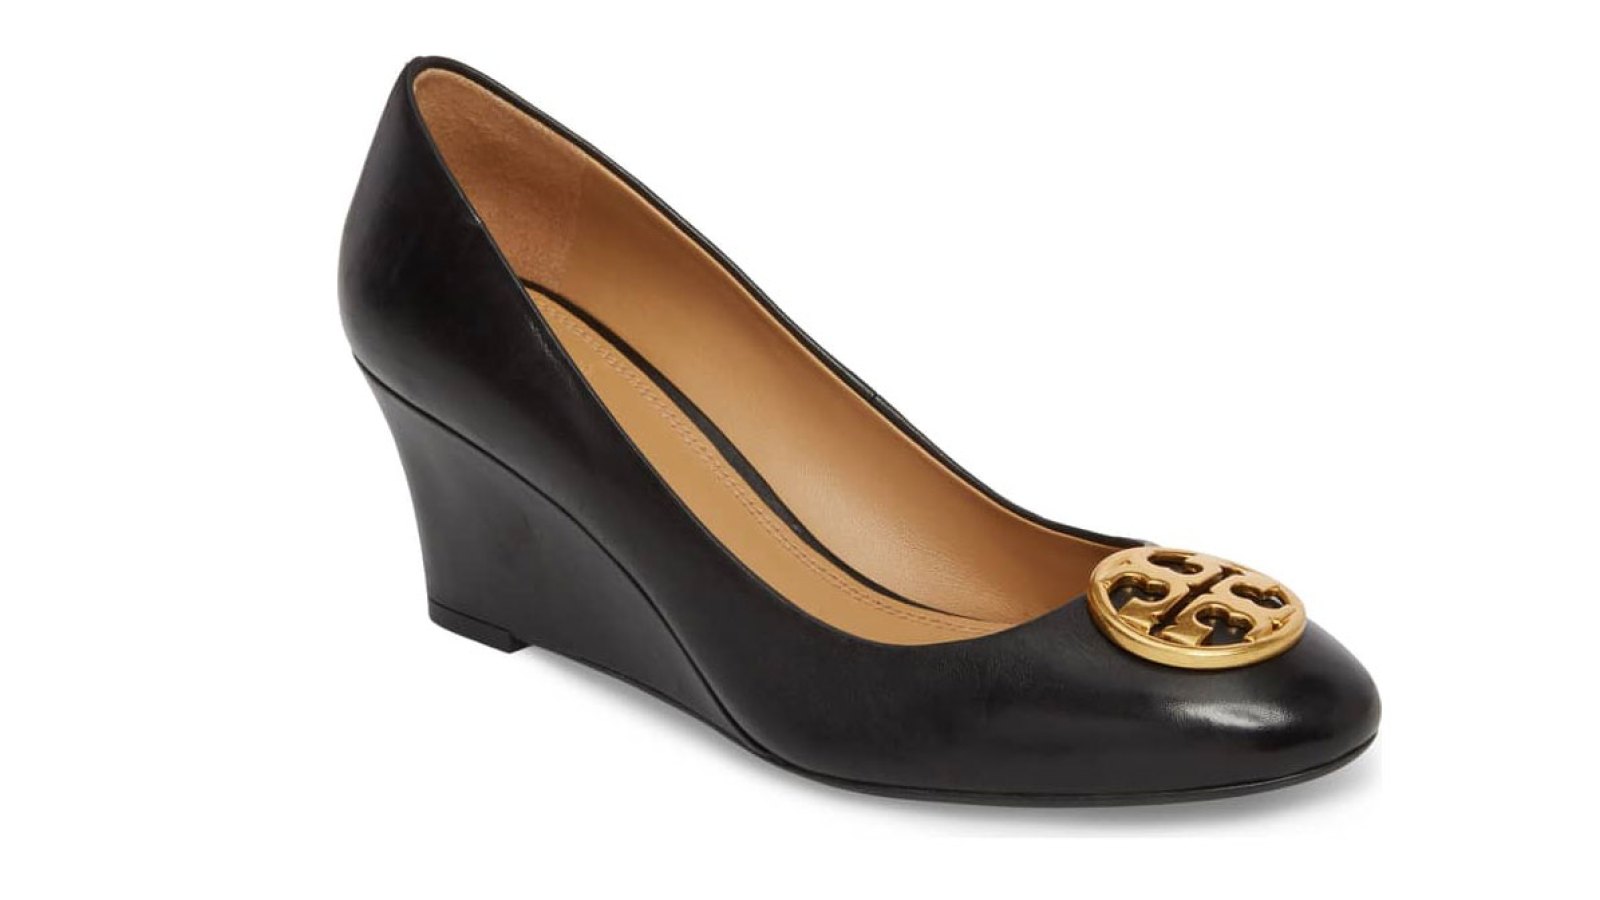 Trade Your Heels for These Gorgeous Tory Burch Wedges